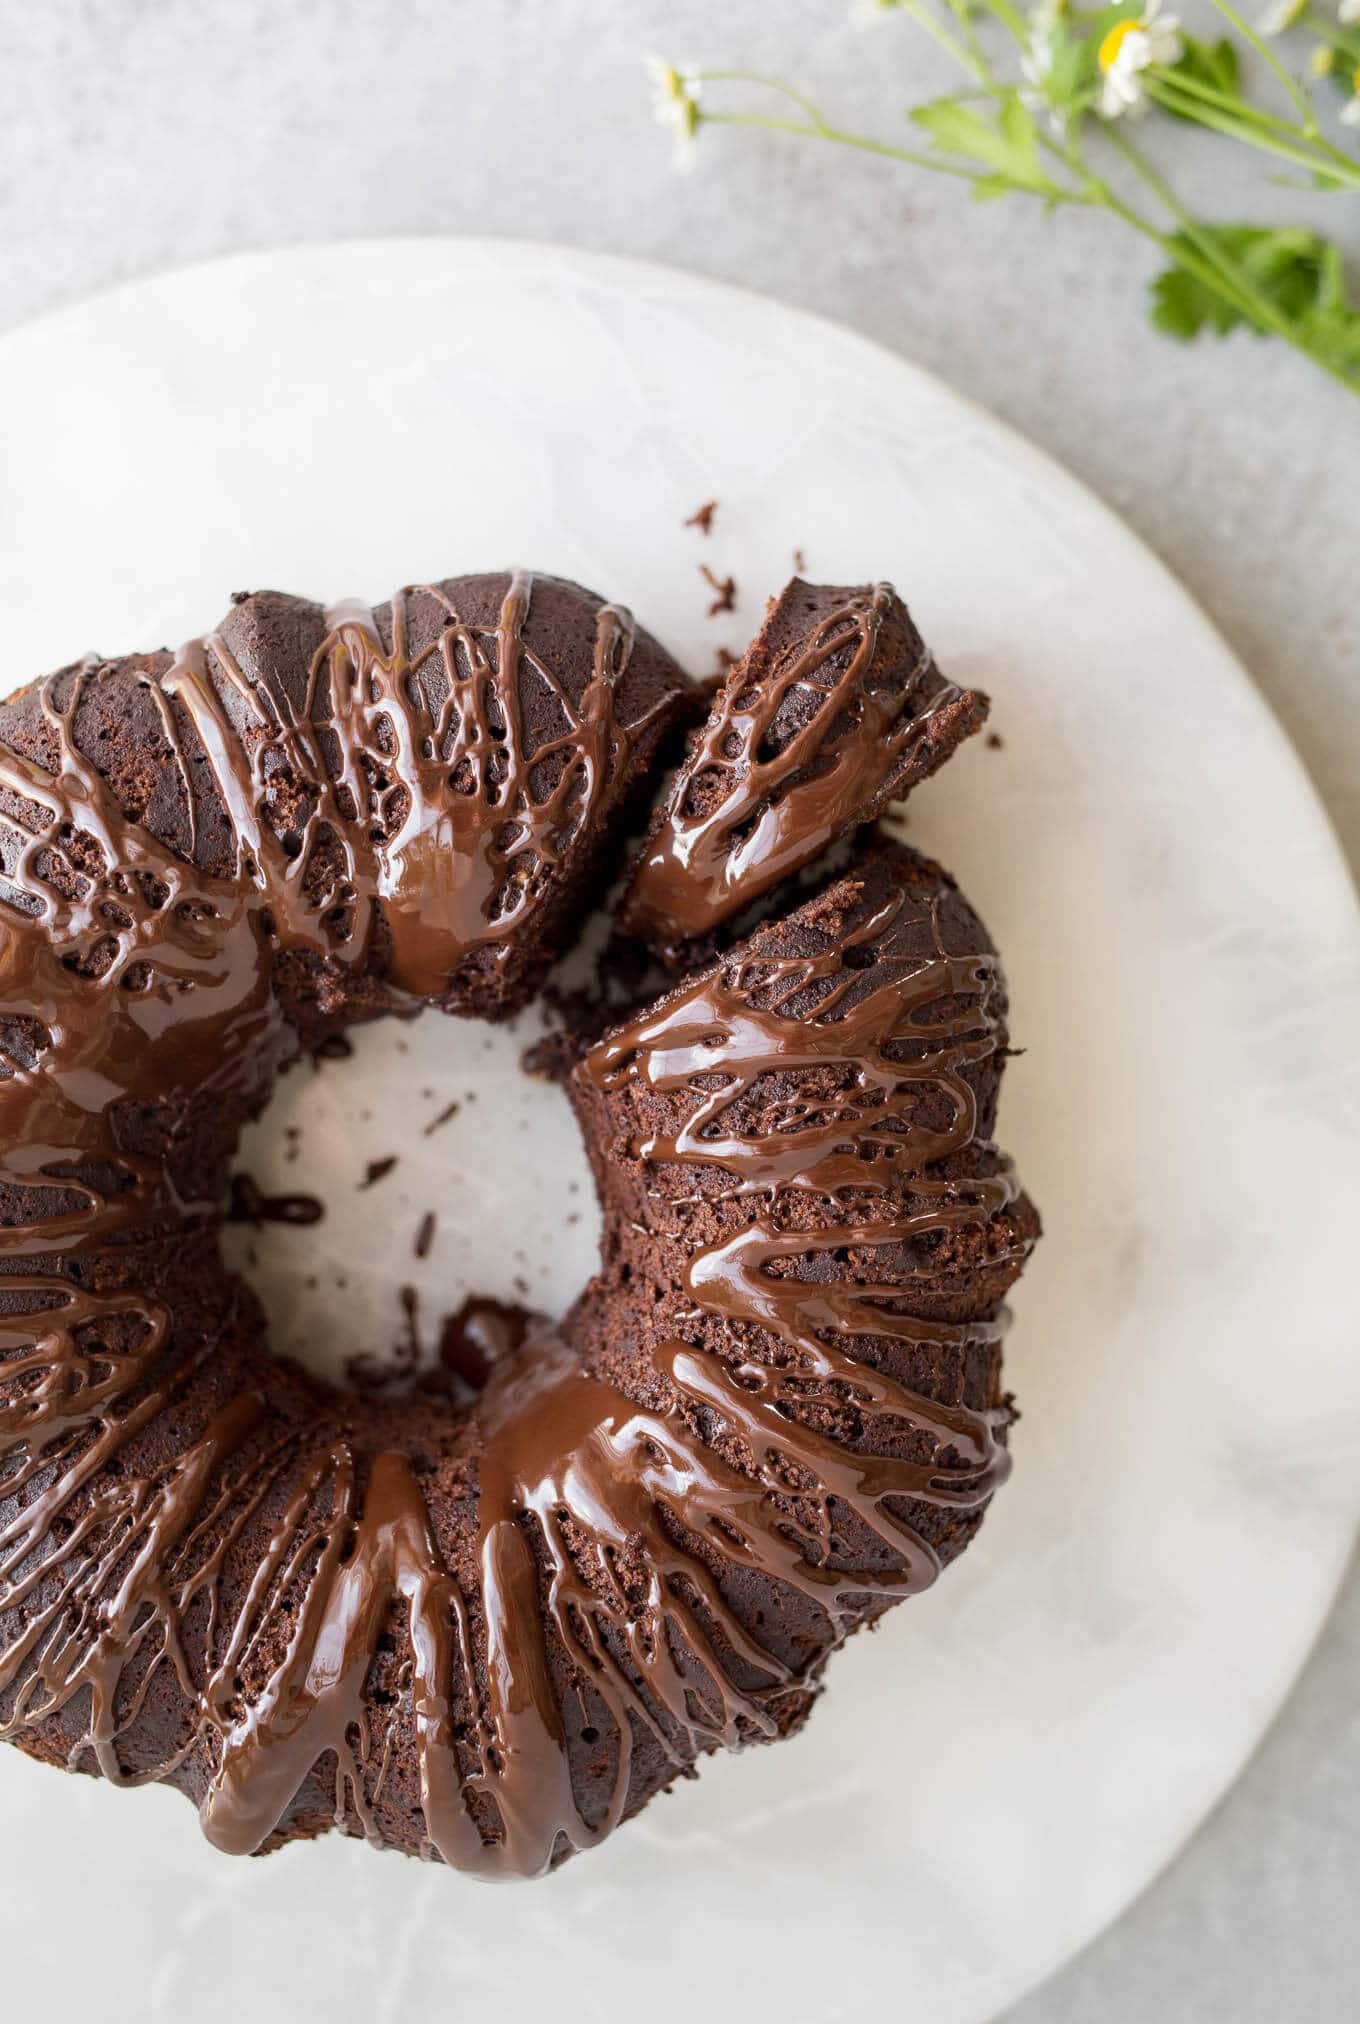 A chocolate bundt cake with chocolate drizzle on top.